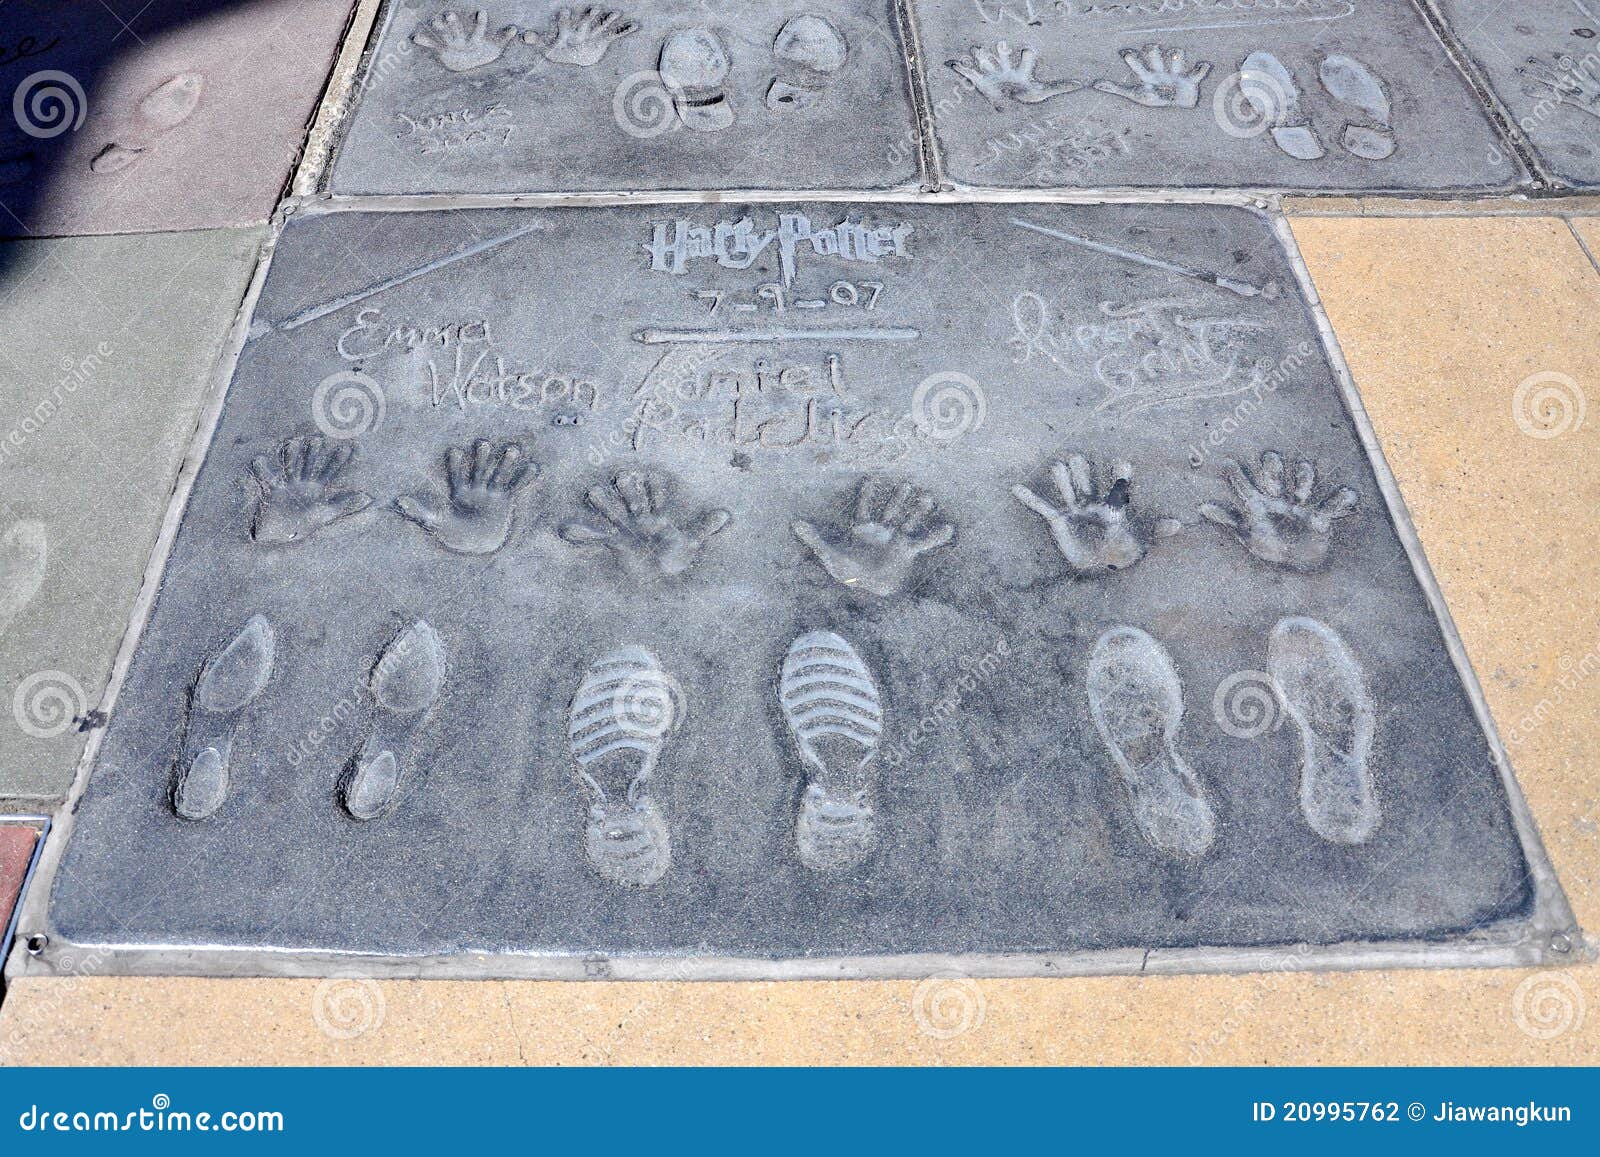 Download Harry Potter Imprint On Hollywood Boulevard Editorial ...